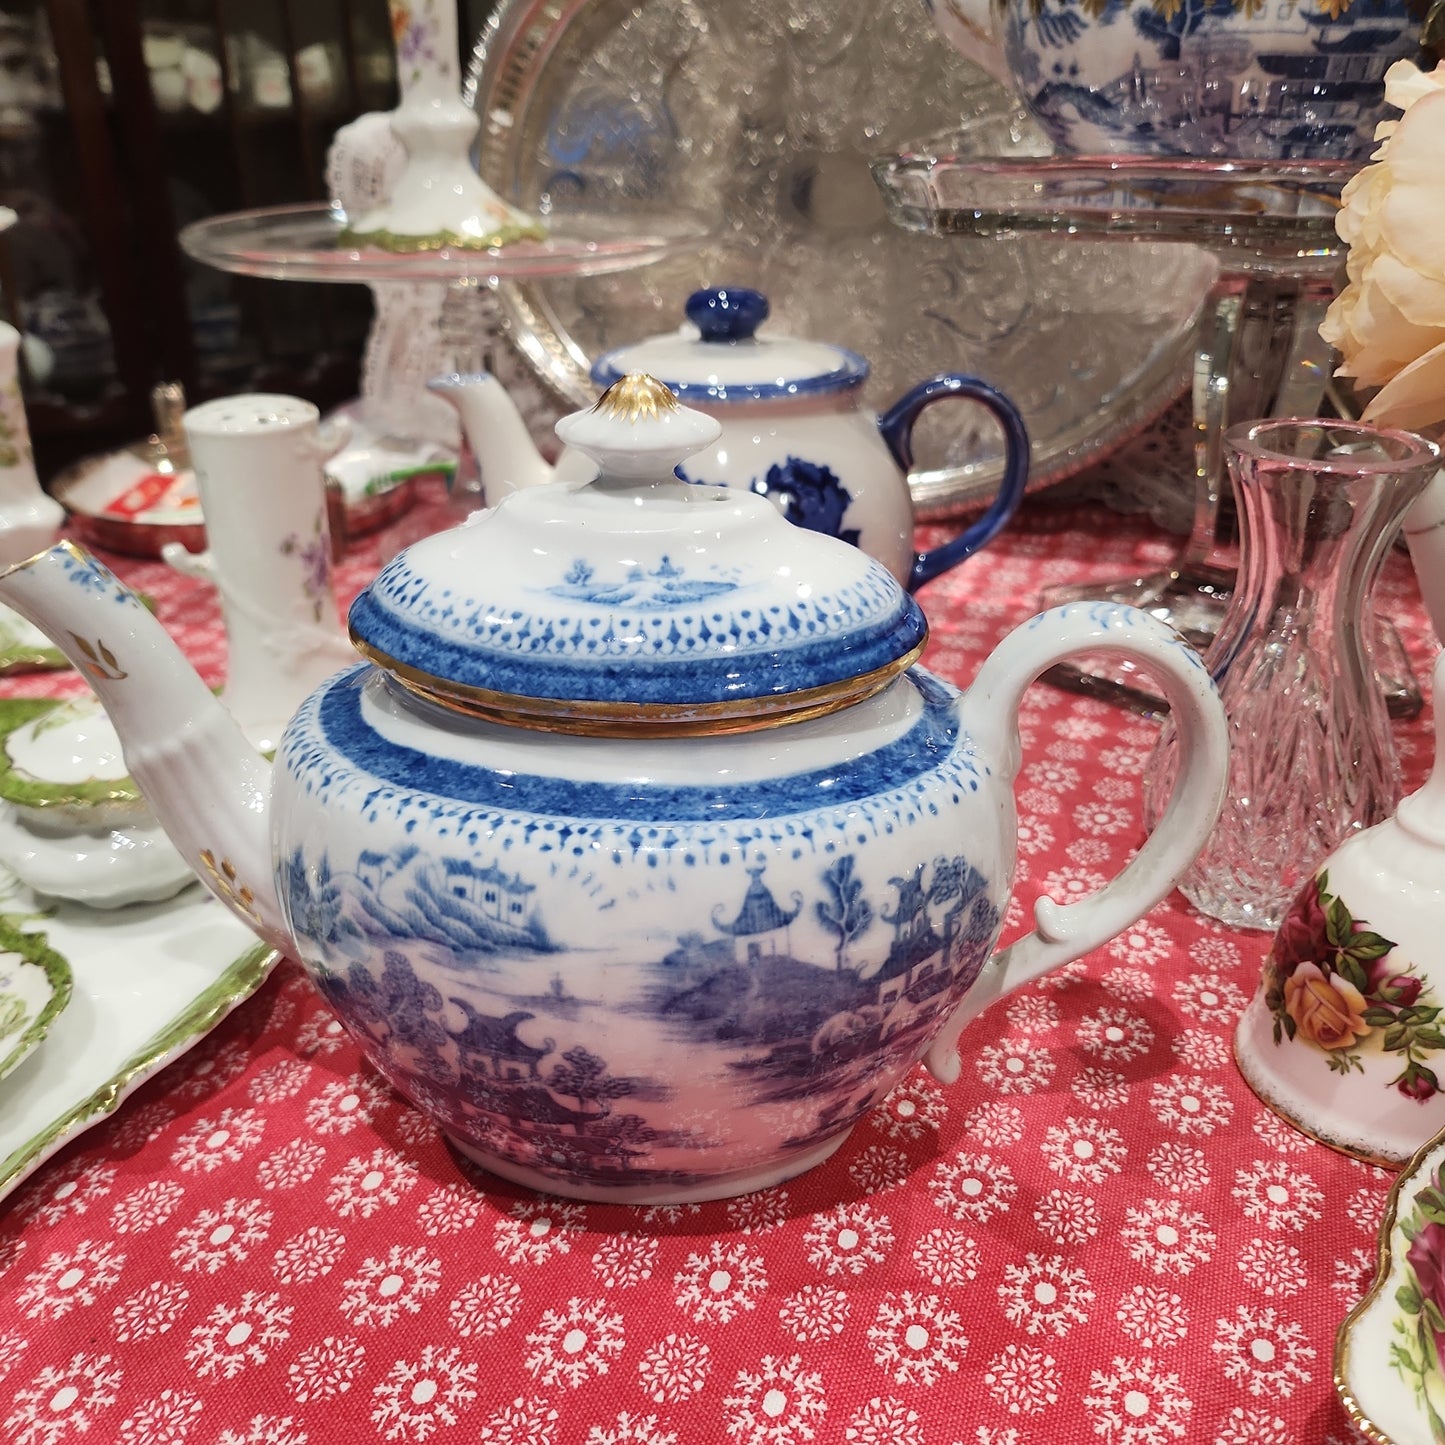 Early 19th century pearlware teapot